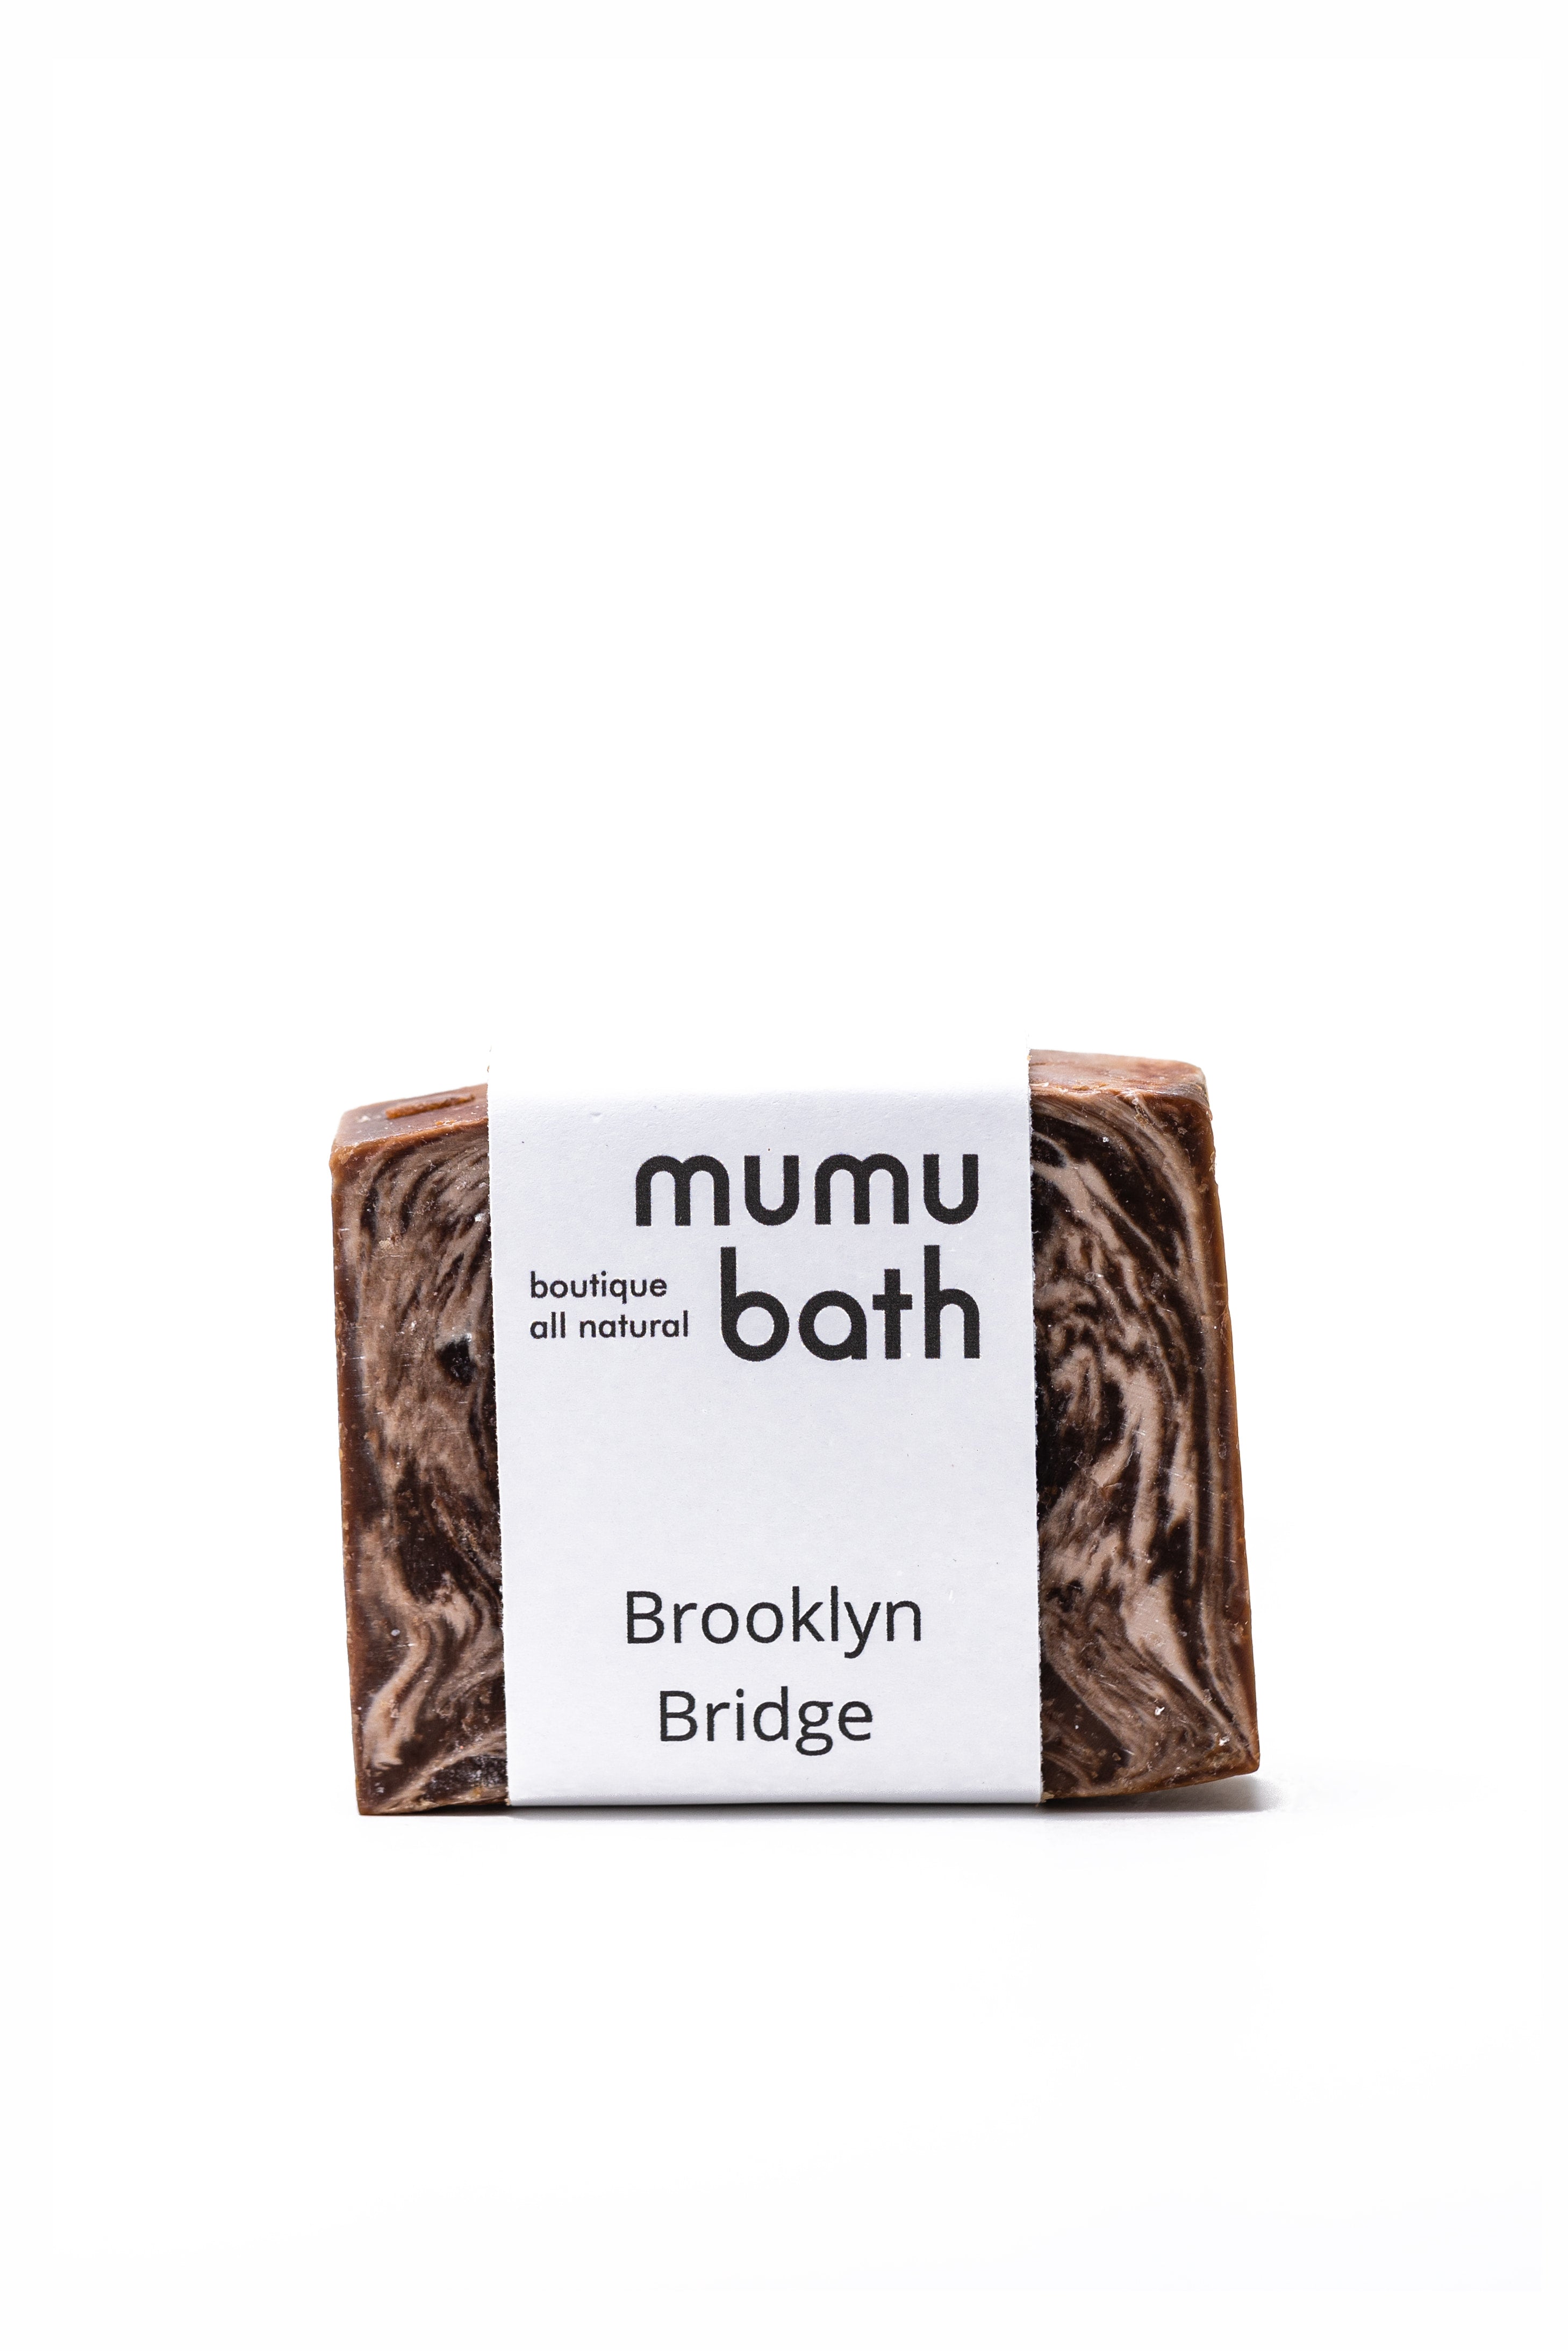 Experience the magic of the Brooklyn Bridge with our all-natural, palm-free, vegan, cruelty-free, and paraben-free soap. This artisanal soap is made with premium ingredients and expert craftsmanship to transport you to the bustling atmosphere of the iconic landmark in New York City.